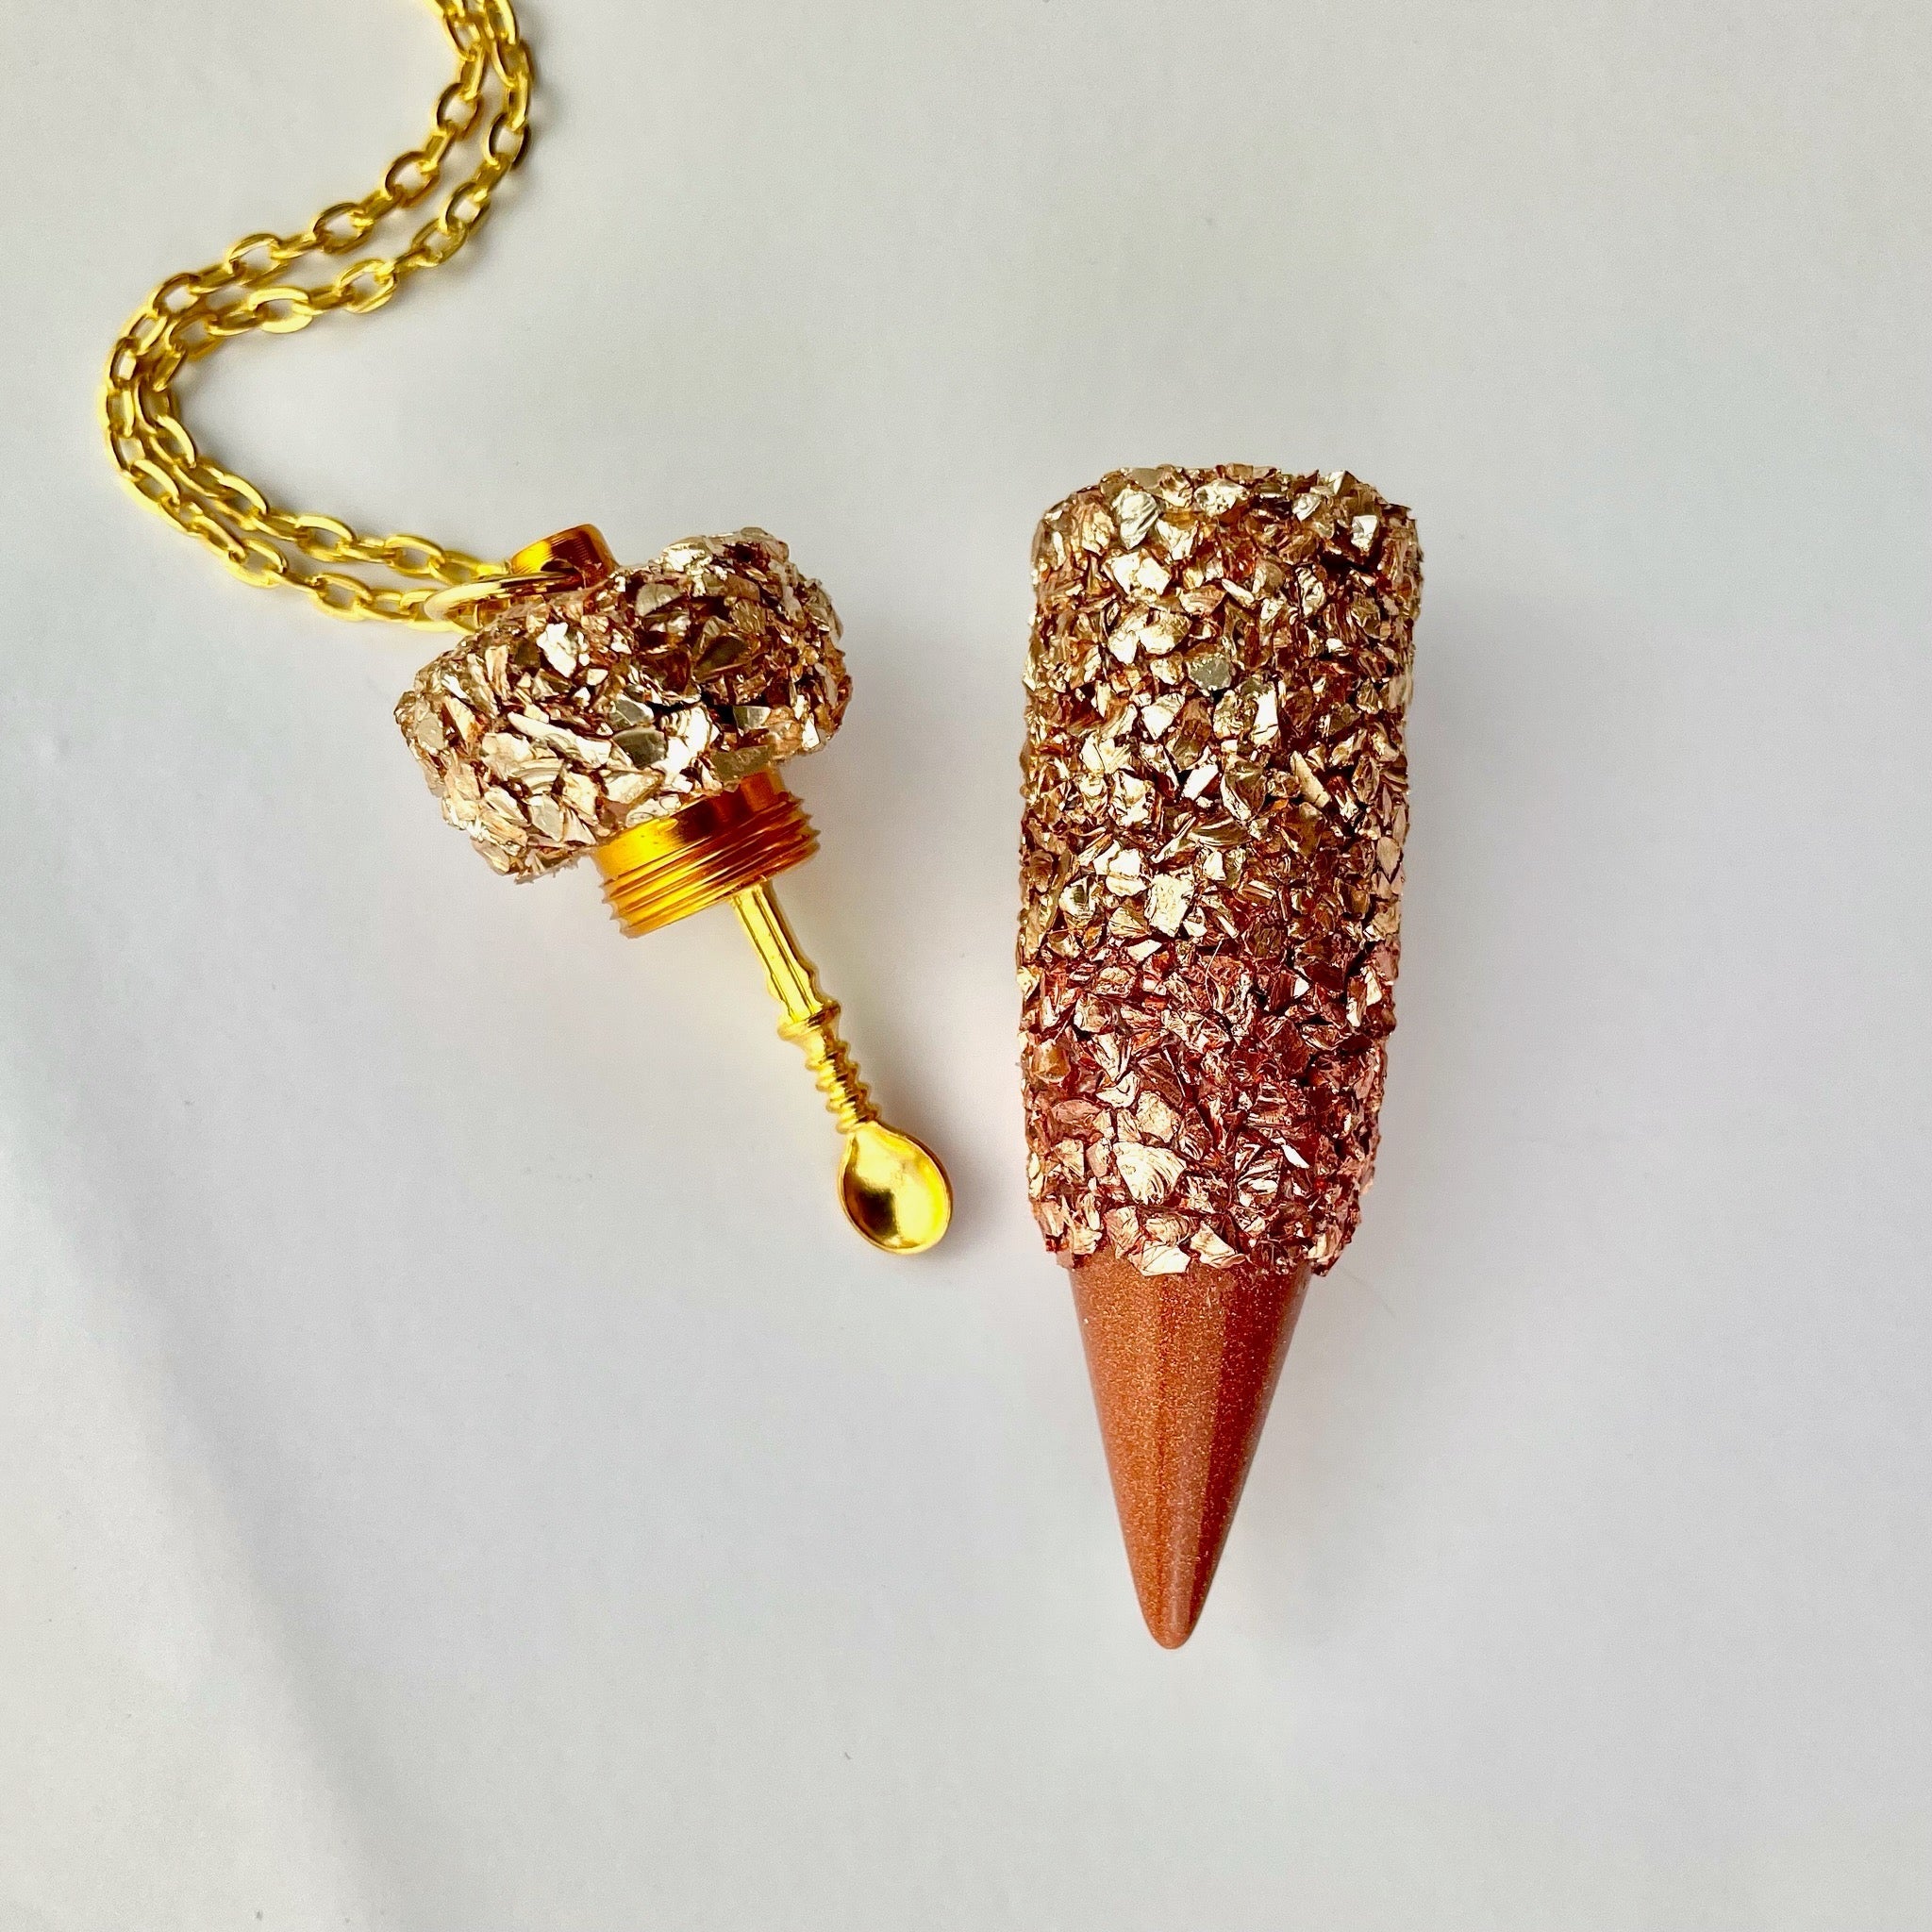 Stash Necklace With Spoon – Rave Fashion Goddess